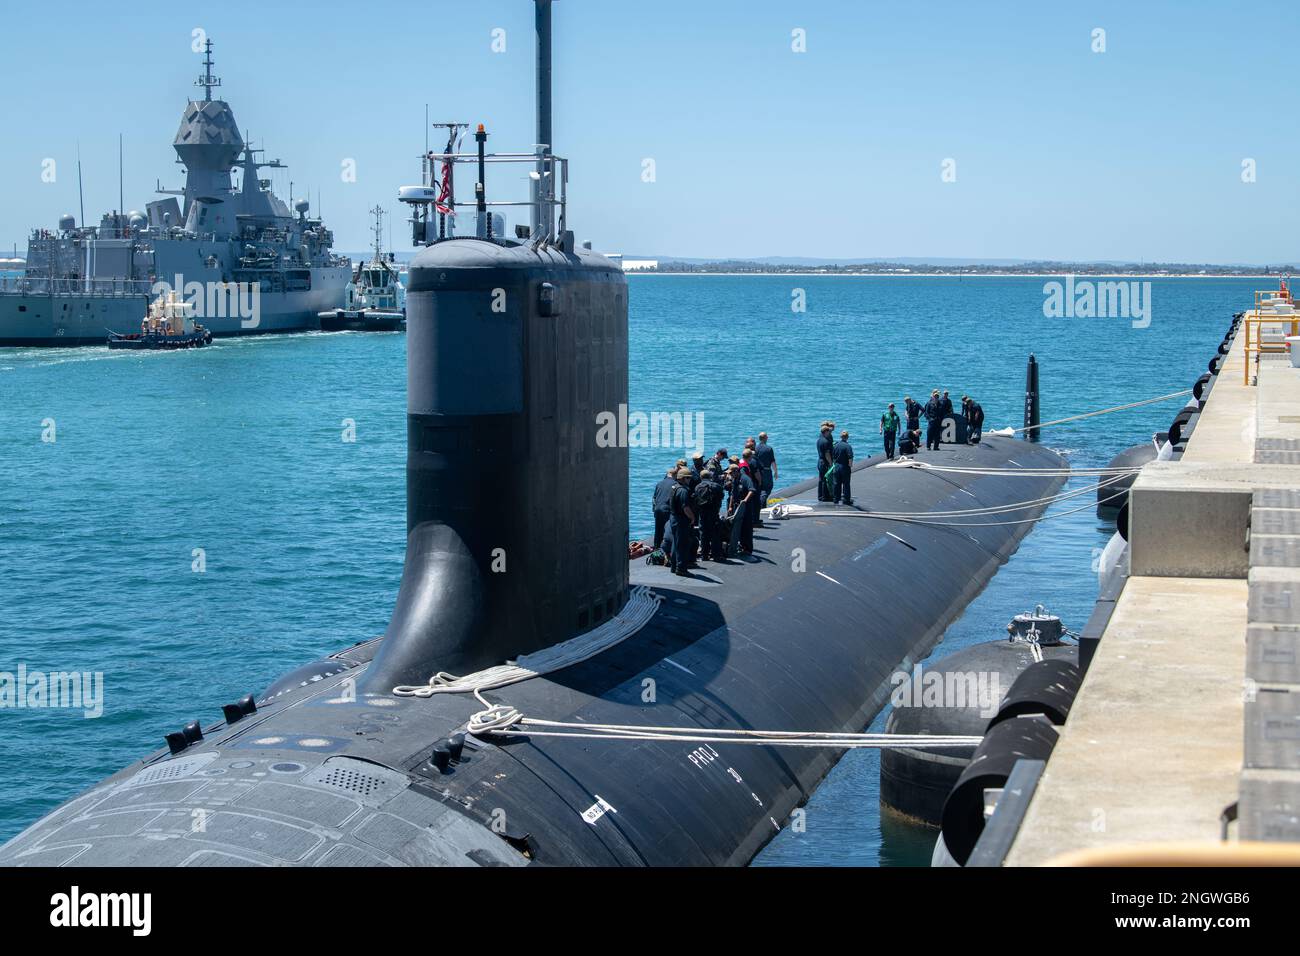 GARDEN ISLAND, Australia - The Virginia-class fast-attack submarine USS Mississippi (SSN 782) moors at Royal Australian Navy HMAS Stirling Naval Base, Nov. 28. Mississippi is currently on patrol in support of national security interests in the U.S. 7th Fleet area of operations. Stock Photo